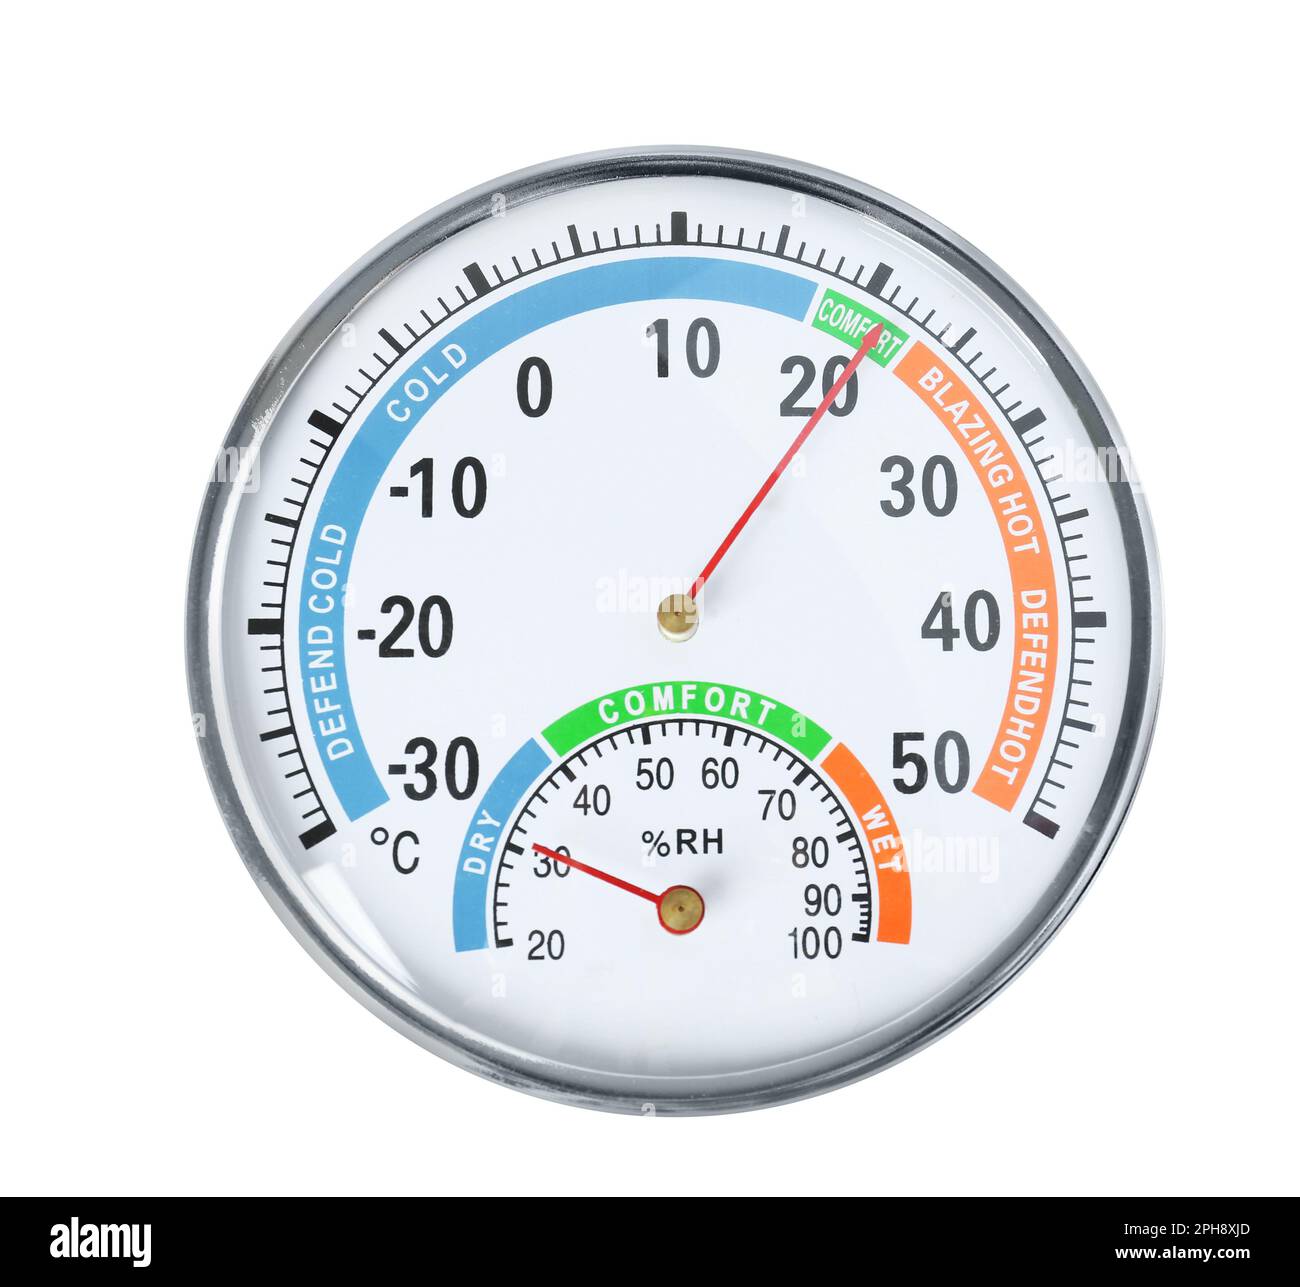 https://c8.alamy.com/comp/2PH8XJD/round-mechanical-hygrometer-isolated-on-white-top-view-meteorological-tool-2PH8XJD.jpg